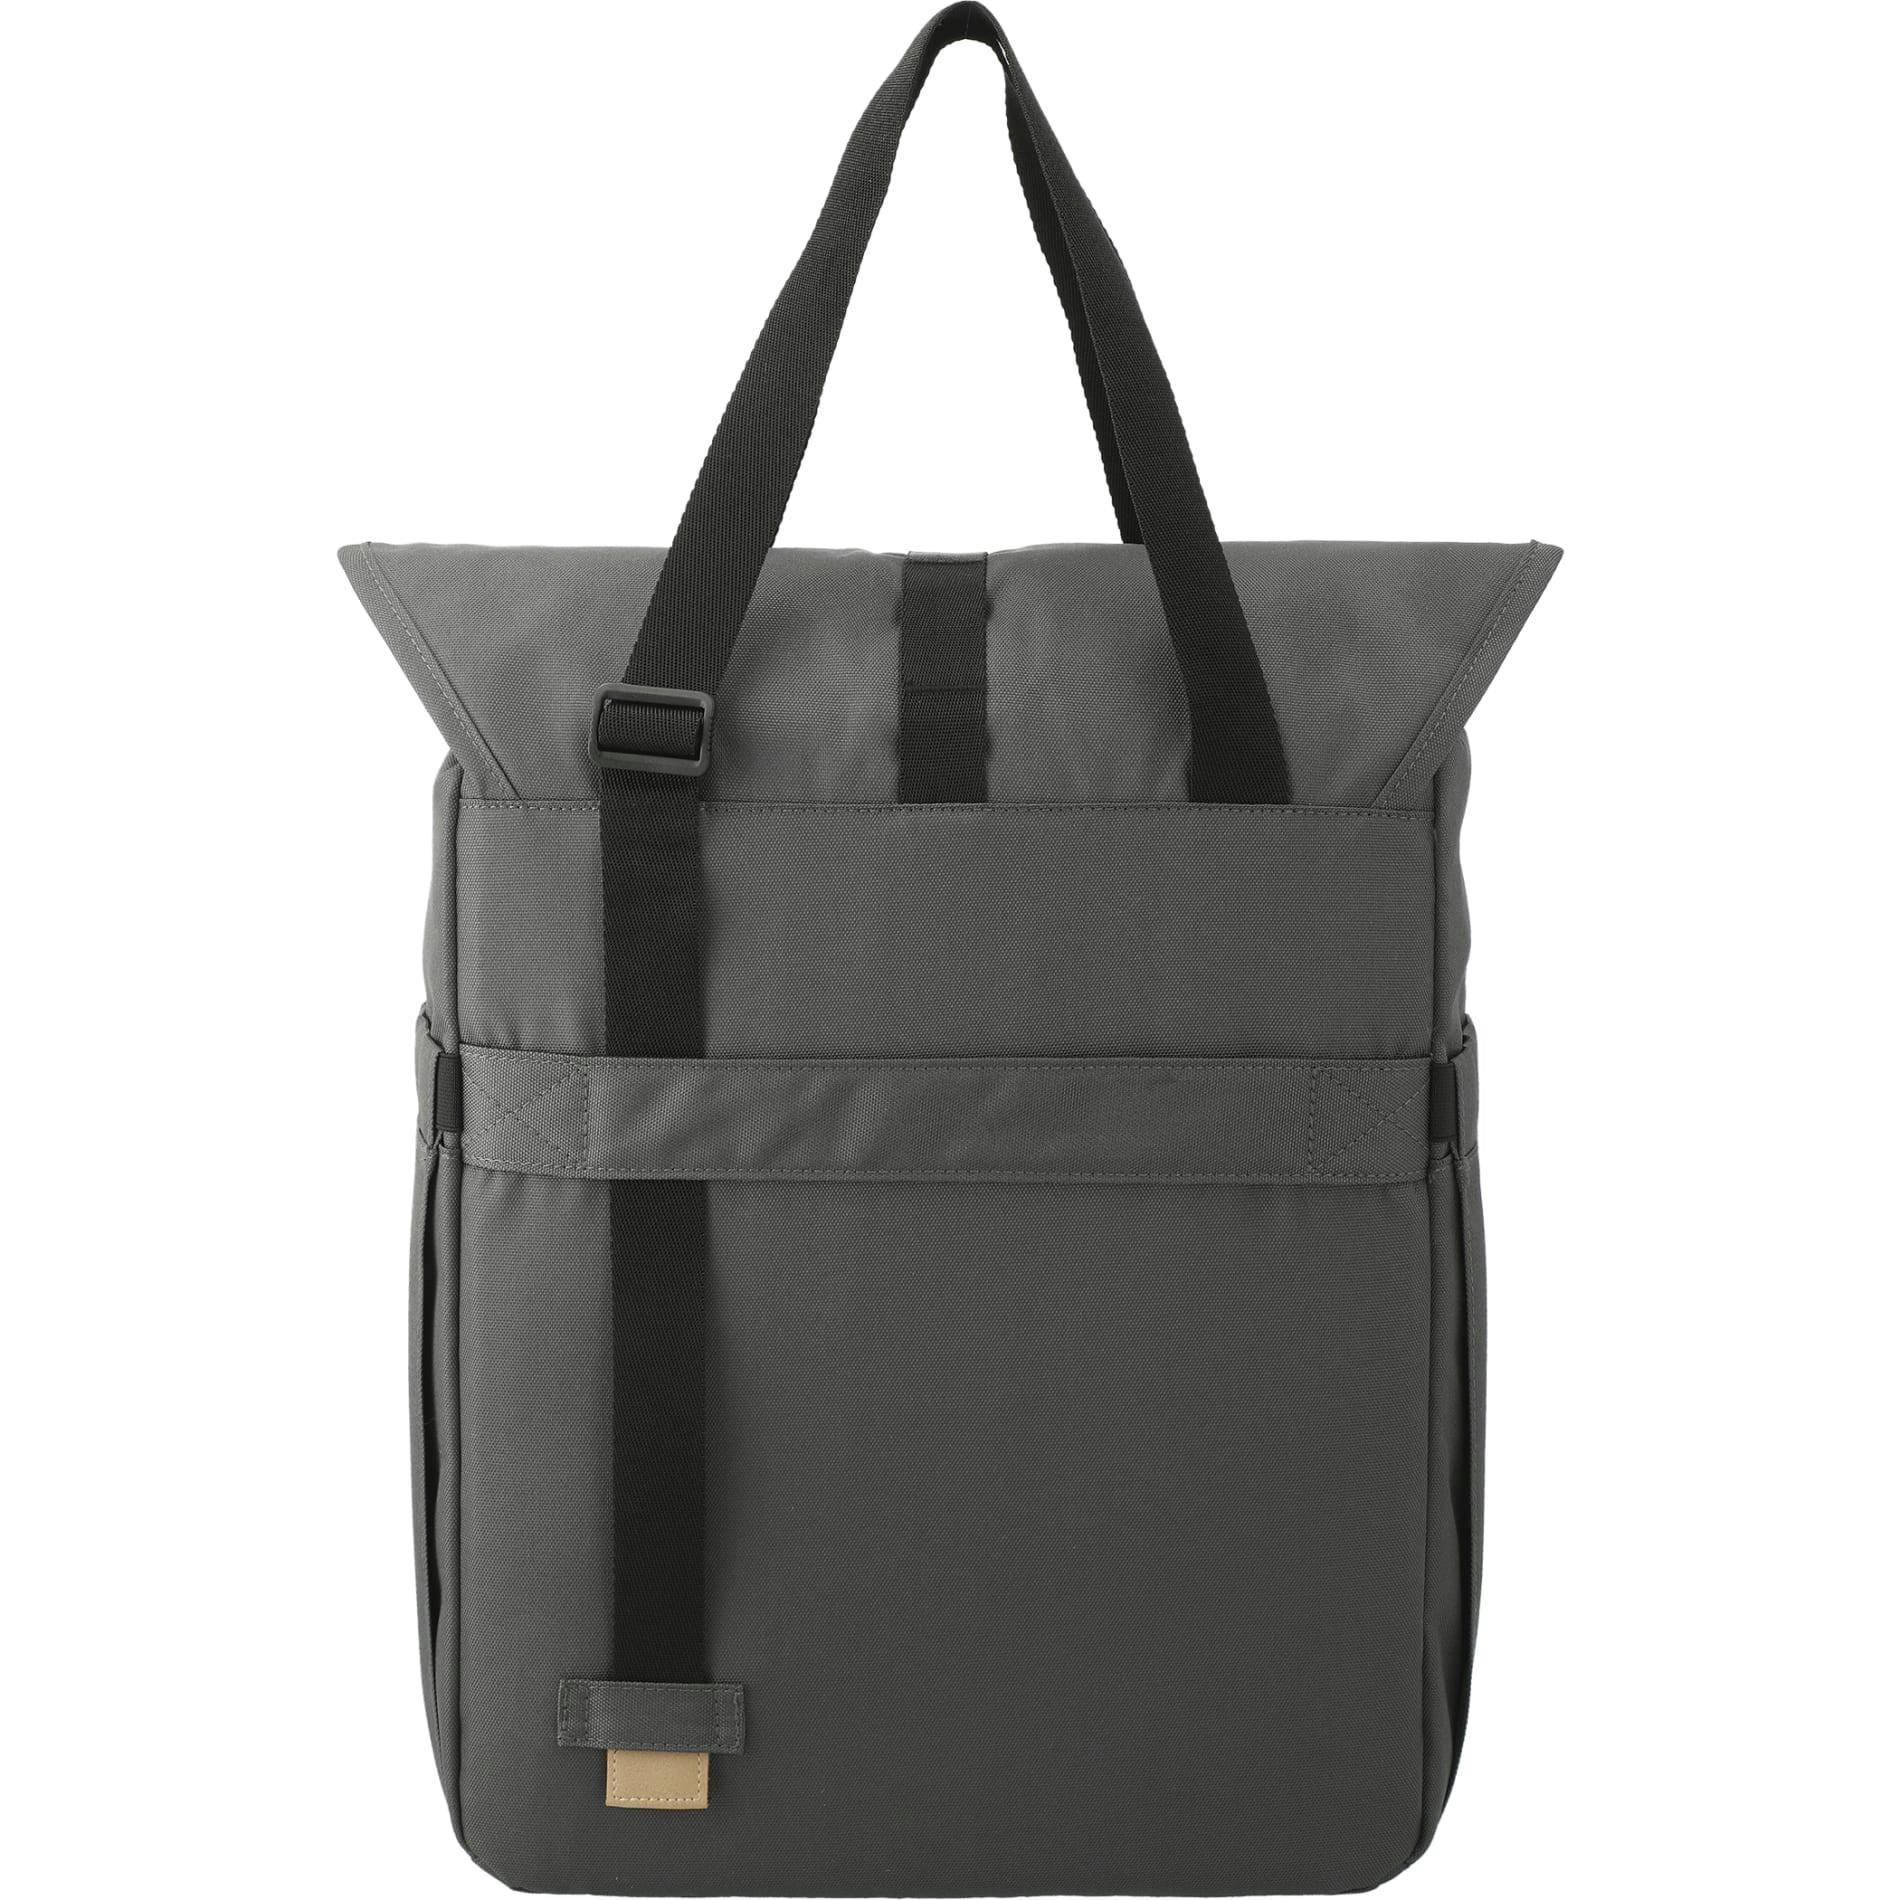 Aft Recycled Computer Tote - additional Image 2